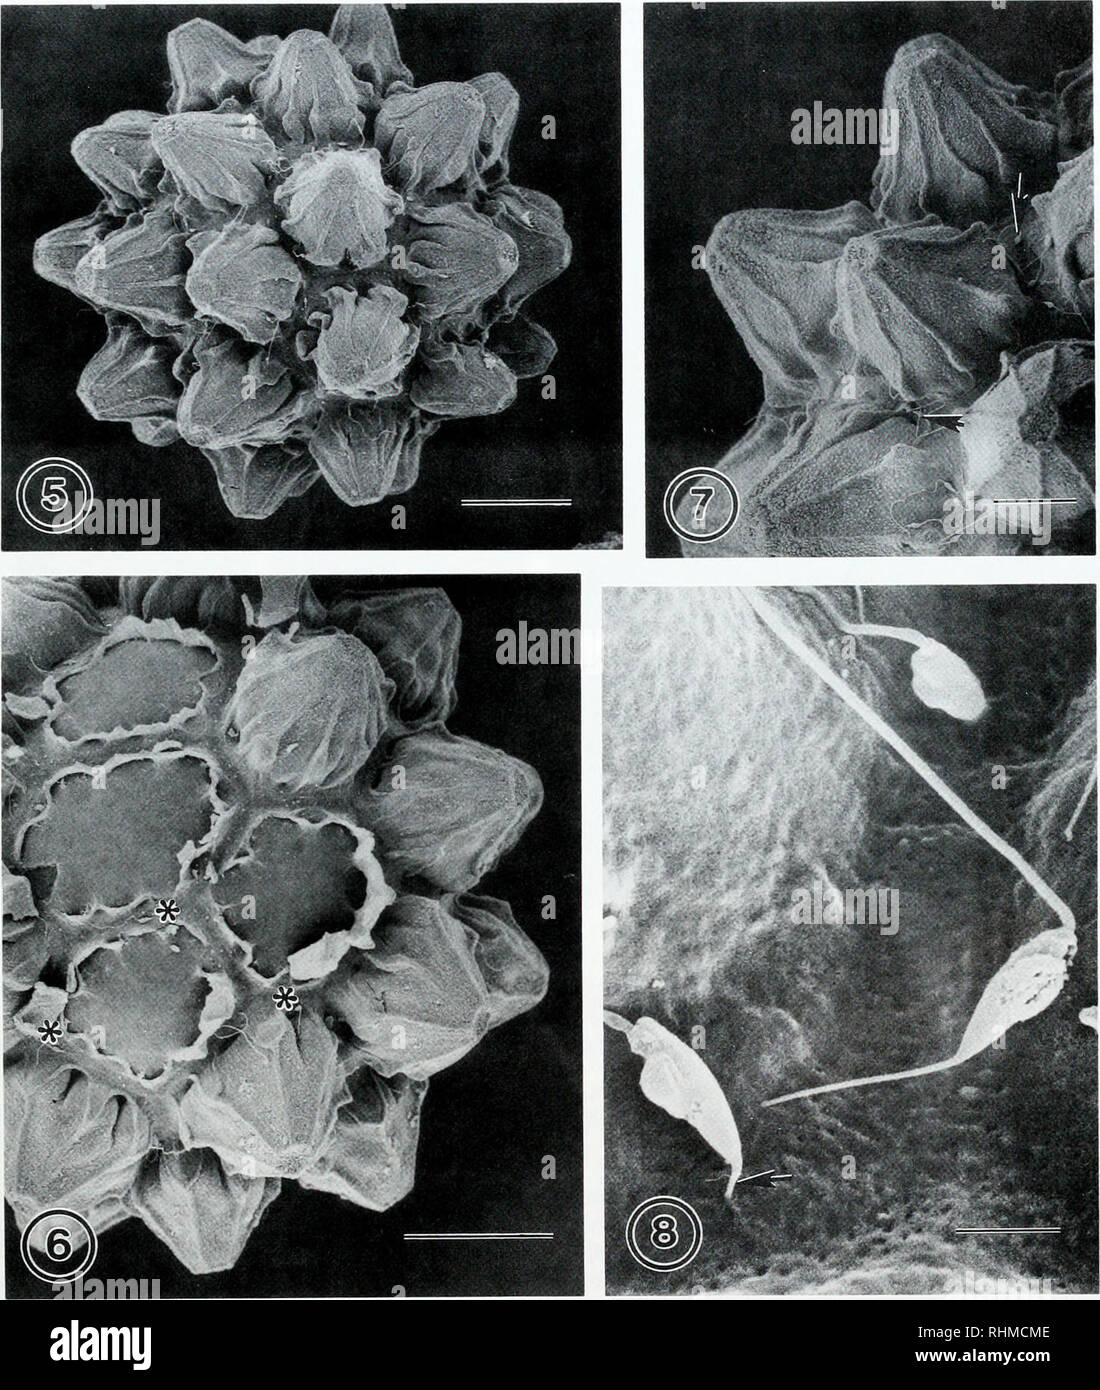 . The Biological bulletin. Biology; Zoology; Biology; Marine Biology. HULL CUPULES OF CHITON EGGS 273. Figures 5-8: Scanning electron micrographs of fertilized eggs of Lepidochitona dentiens. Figure 5. Fertilized egg of L. dentiens demonstrating closed cupules. Scale bar = 40 ^m. Figure 6. Fertilized egg of L. dentiens with some cupules removed. No sperm are found inside cupules. Note sperm penetrating hull between cupules (asterisks). Scale bar = 40 ^m. Figure 7. Fertilized egg of L. dentiens showing sperm in intercupule area (arrows). Scale bar = 20 ^m. Figure 8. Sperm penetration of L denli Stock Photo